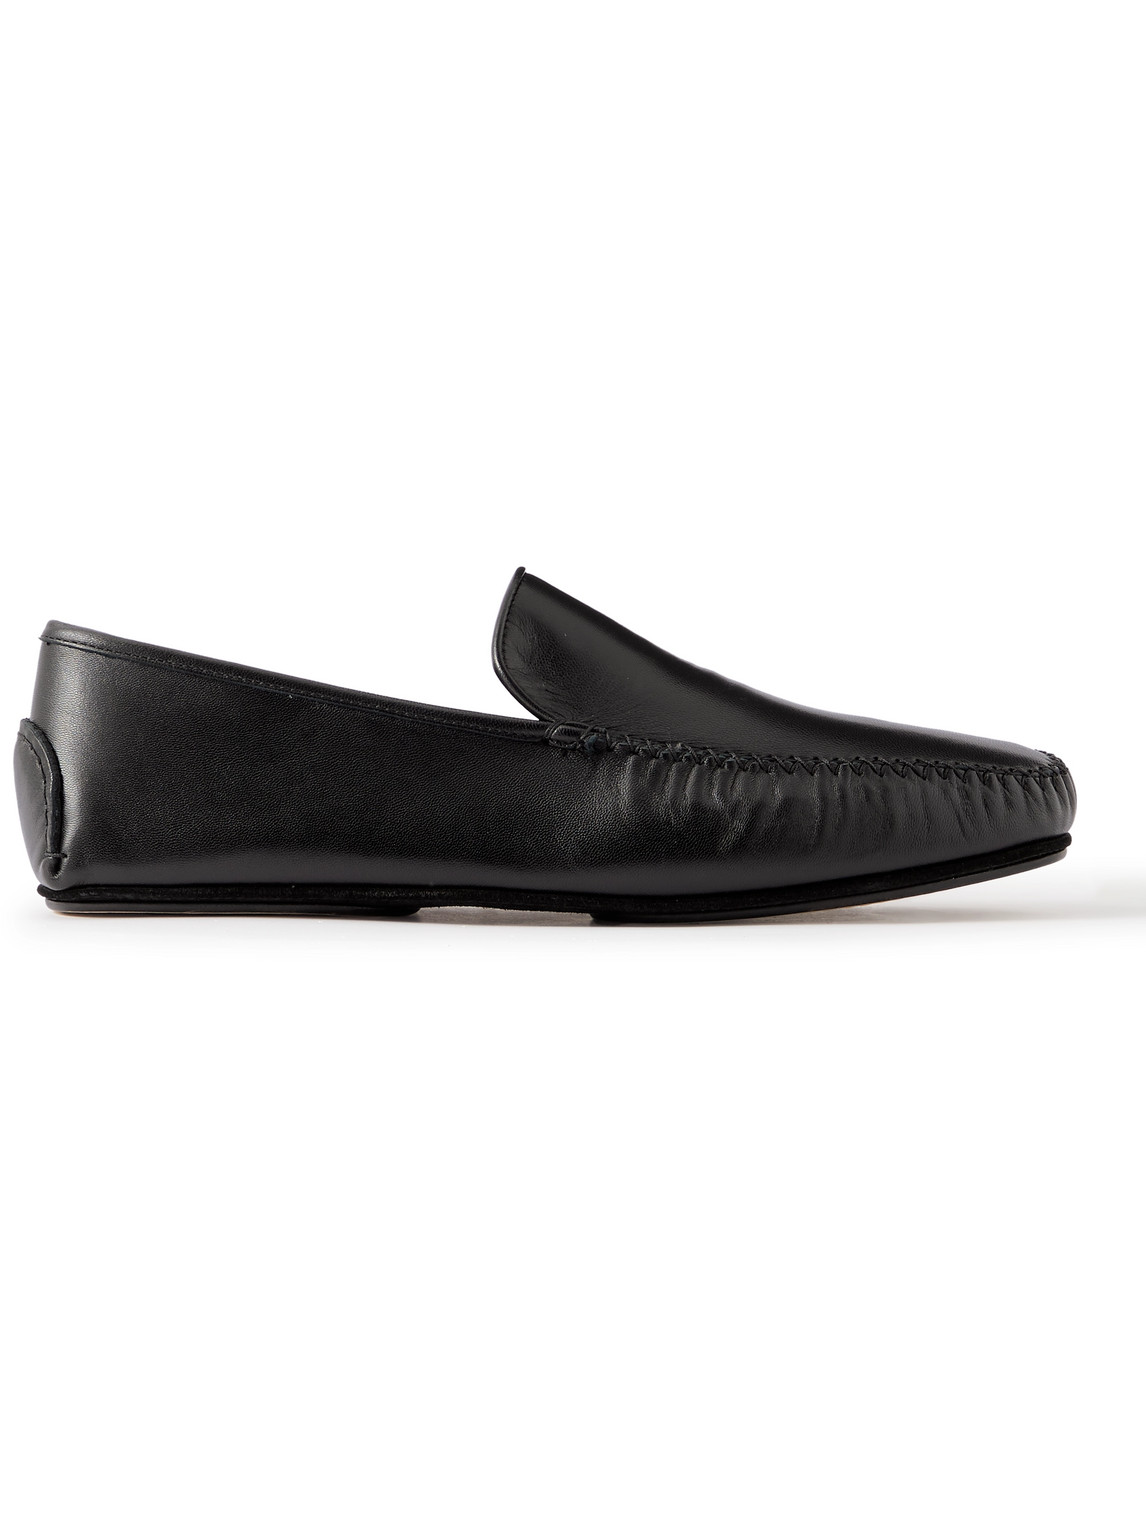 MANOLO BLAHNIK MAYFAIR LEATHER DRIVING SHOES